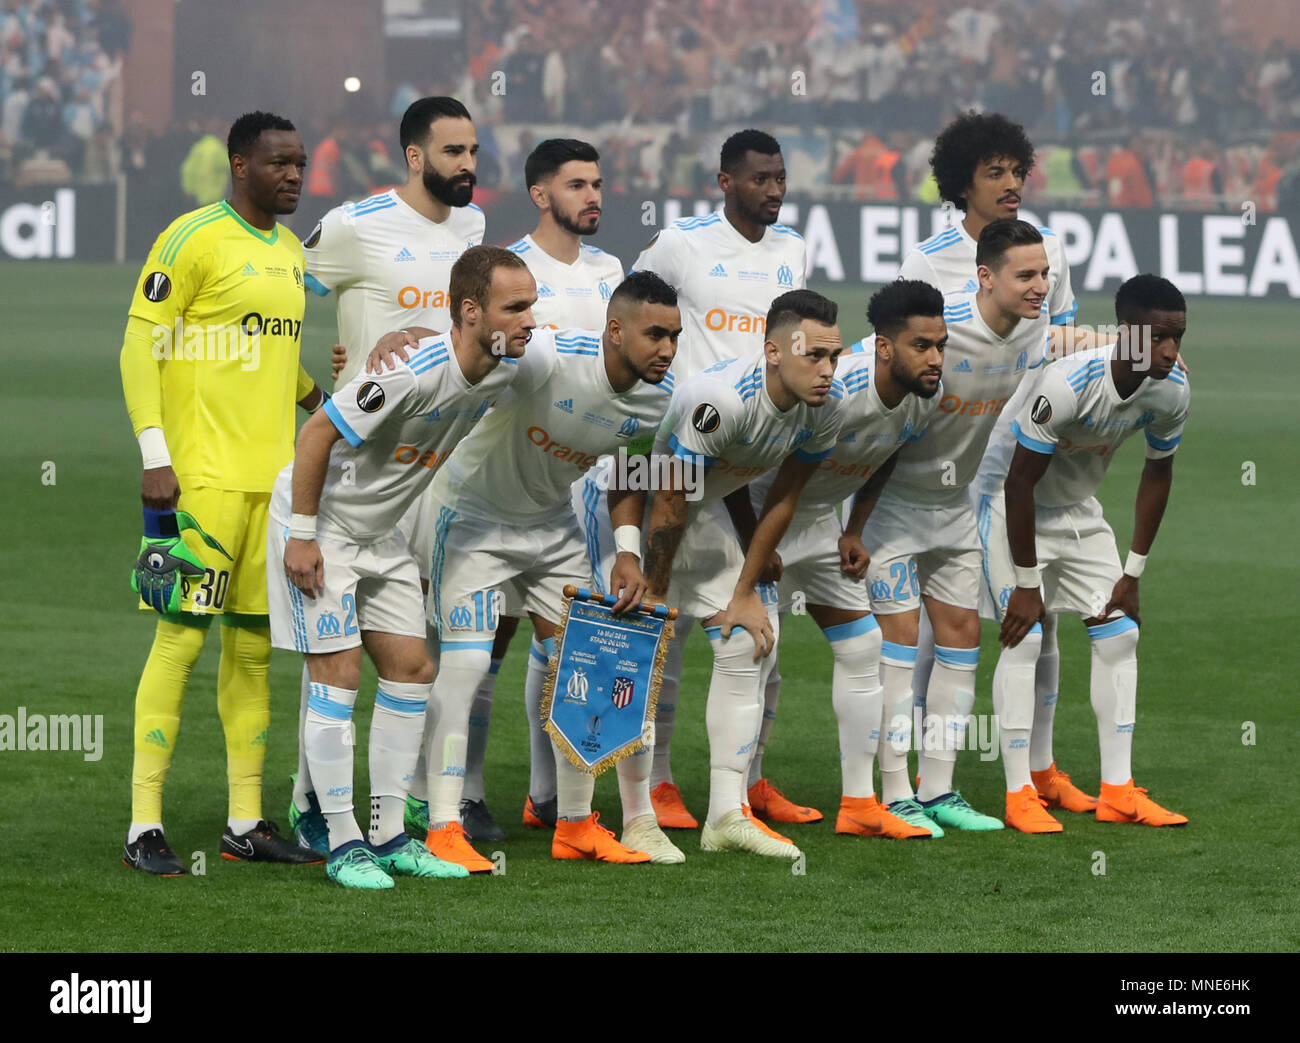 Lyon, France. 16th May, 2018. Soccer, Europa League final, Atletico Madrid  vs Olympique Marseille in the Groupama stadium. Marseilles starting 11  standing for a team photo together before the start of the